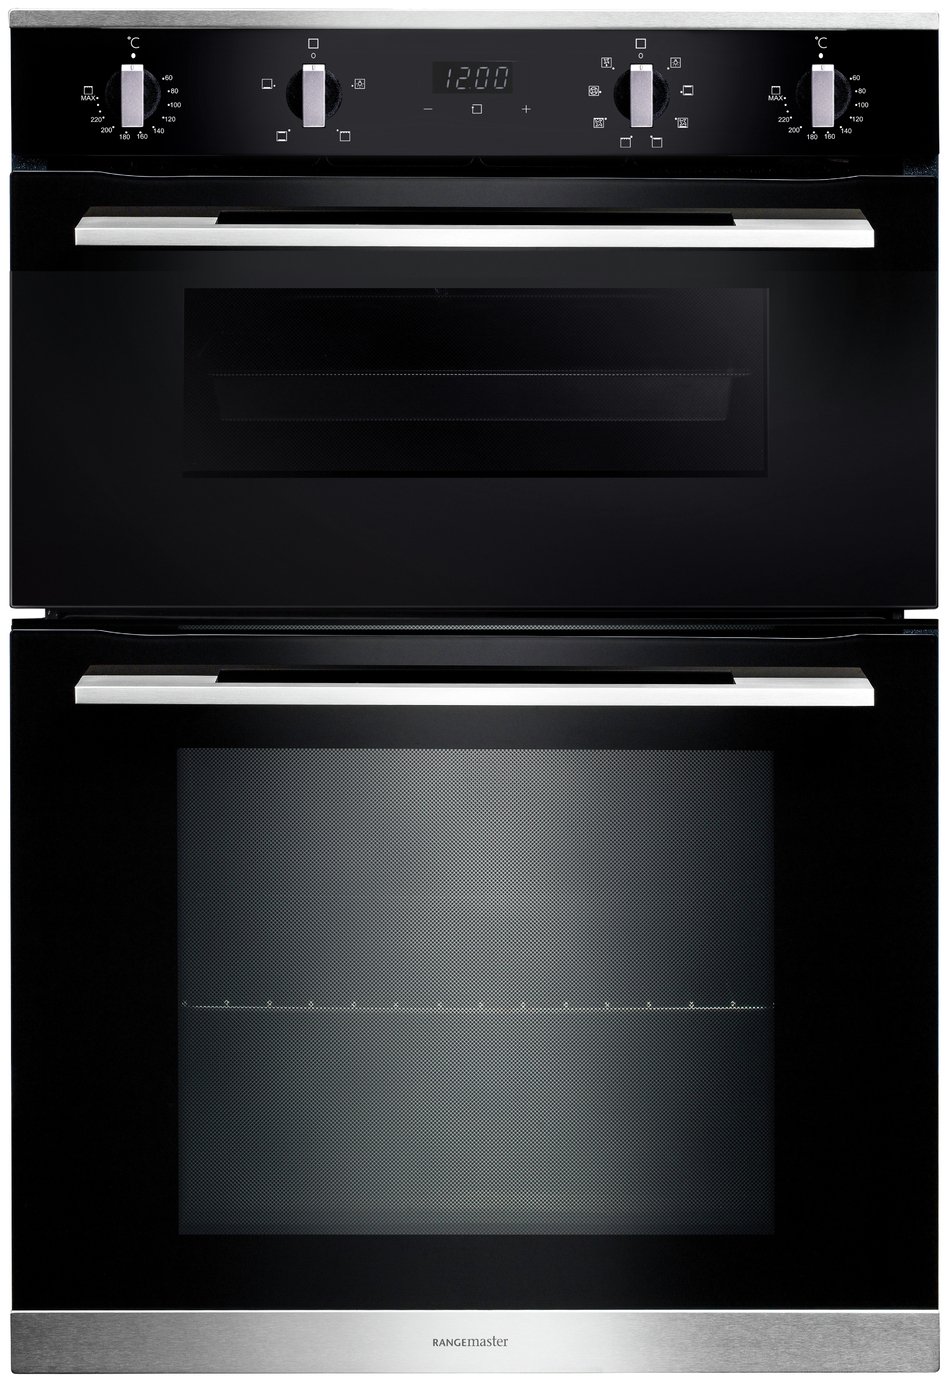 Rangemaster RMB9048BL Built In Double Electric Oven - Black